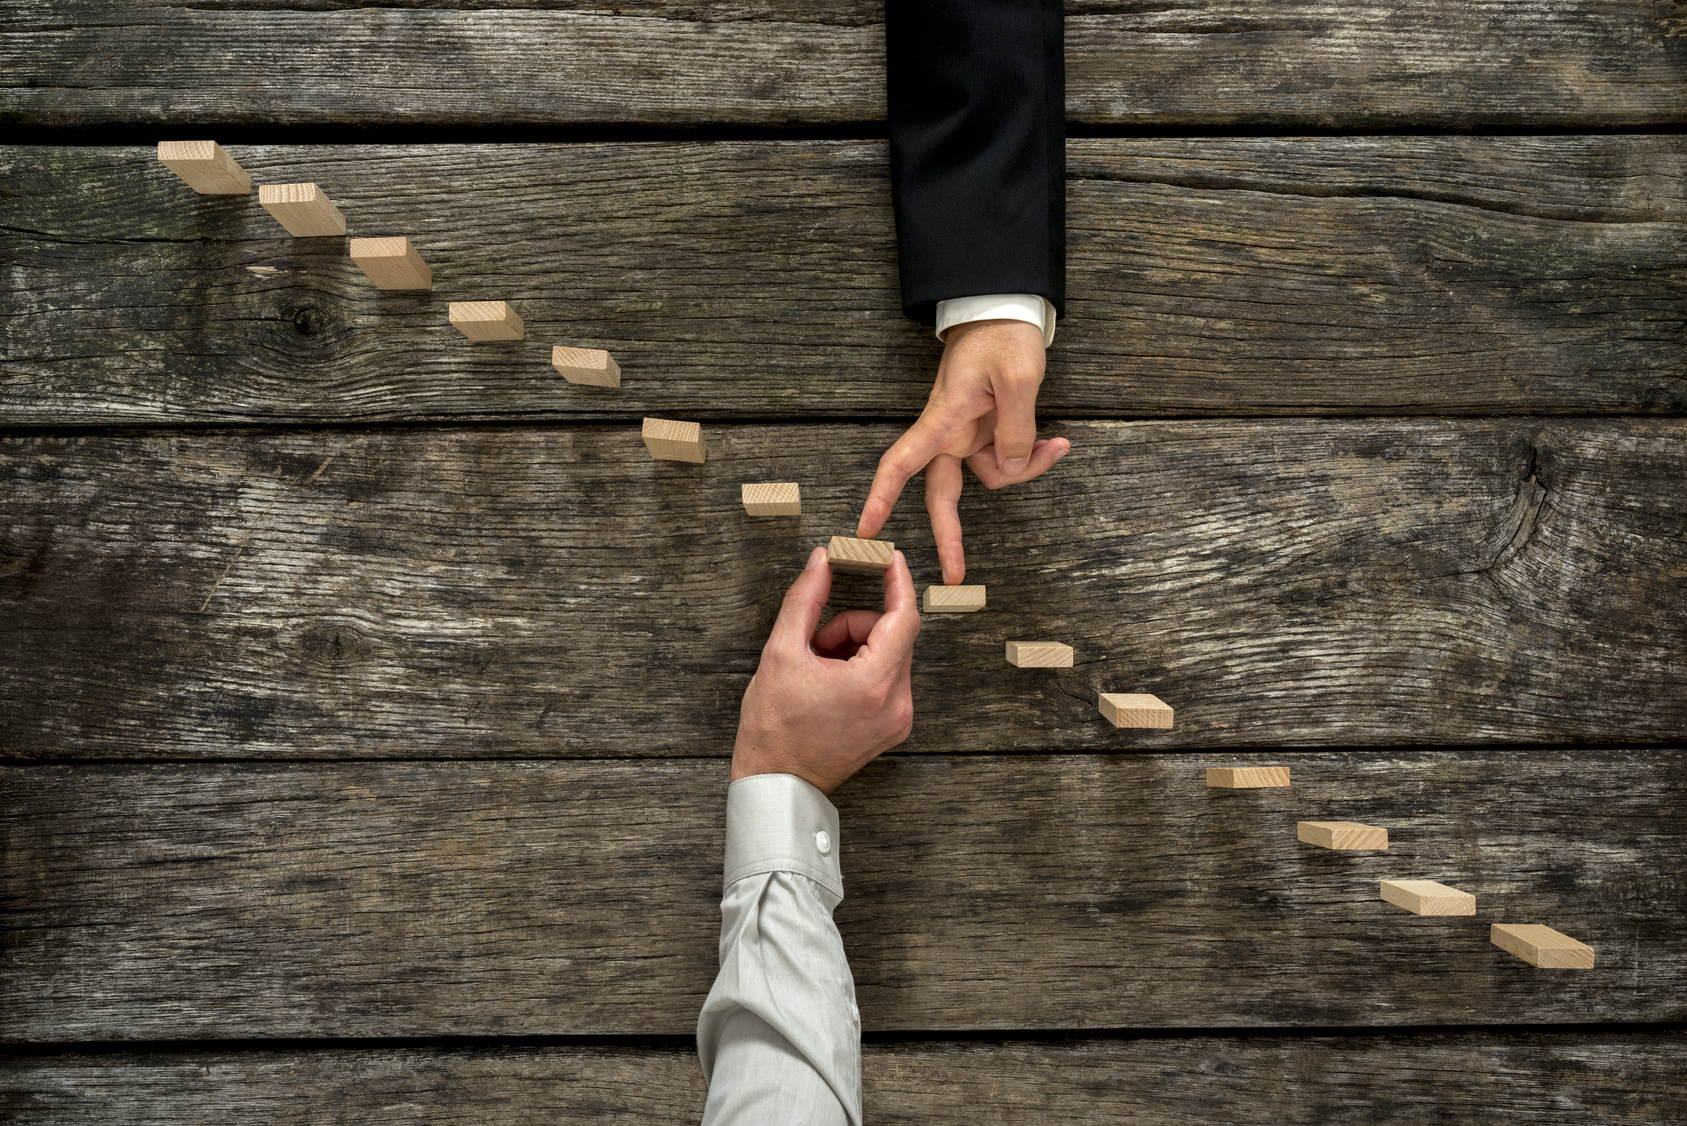 Conceptual image of business partnership and support - businessman supporting wooden step in a staircase made of pegs as his partner walks his fingers up towards growth, achievement and development.